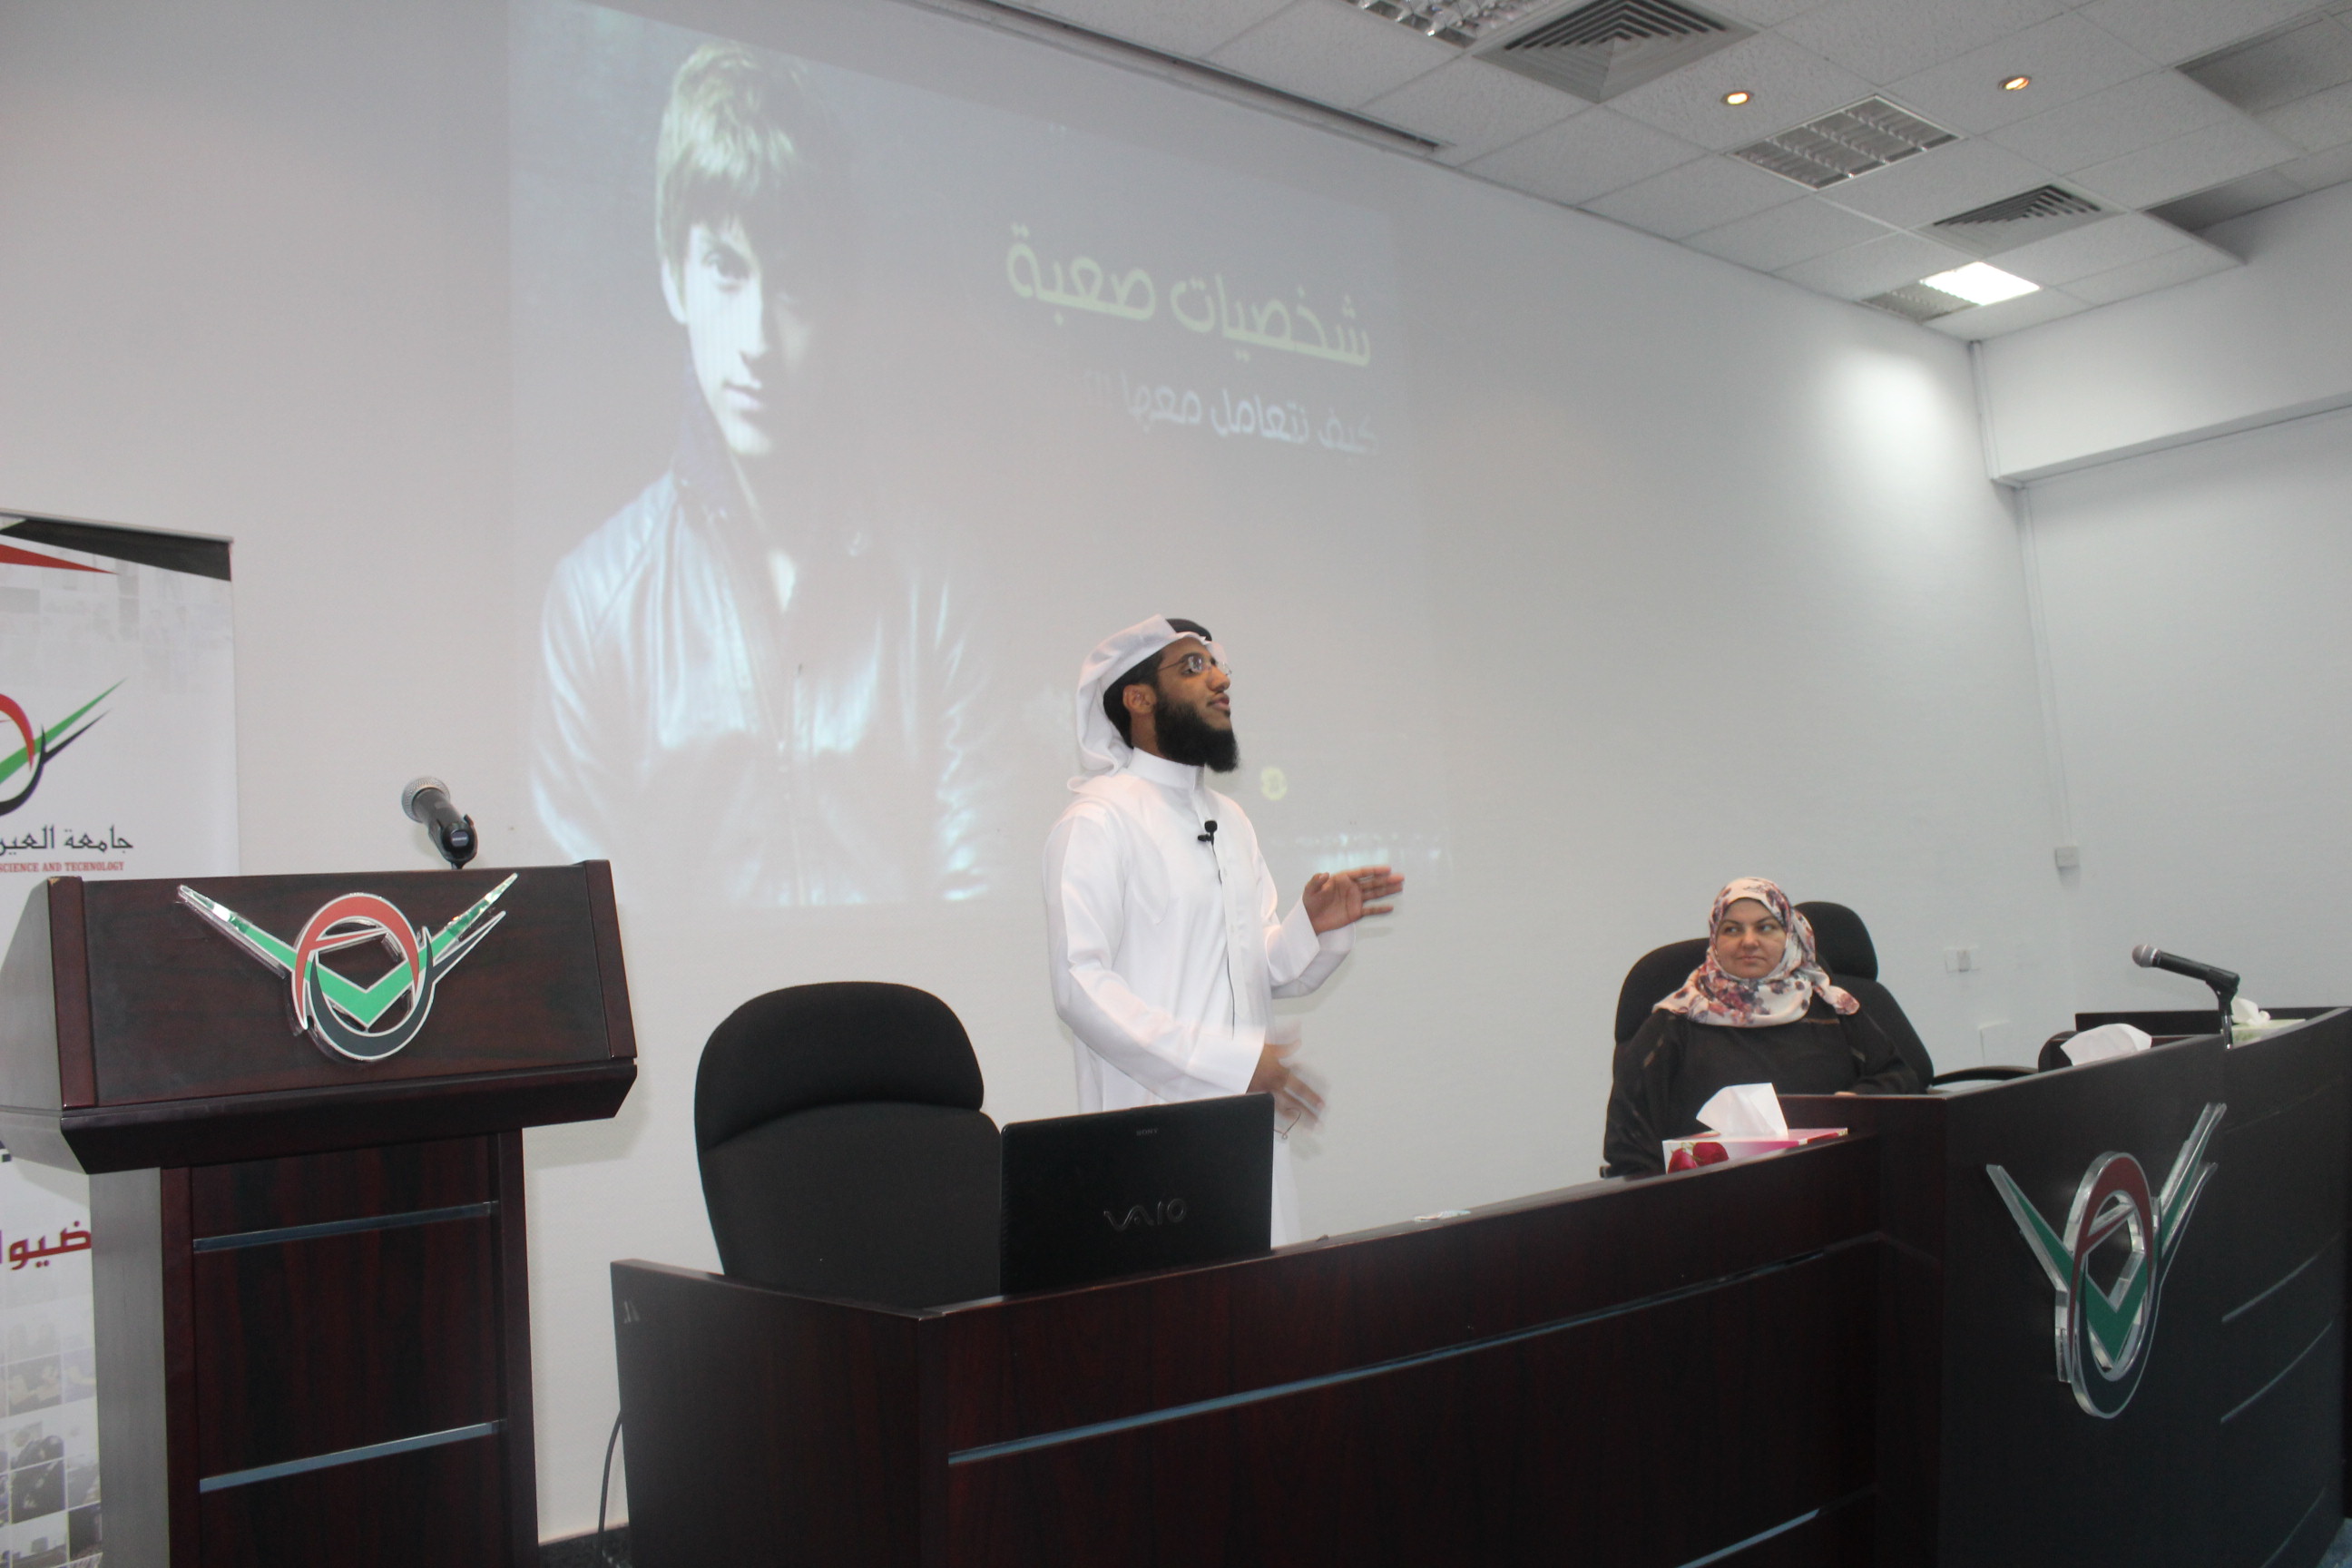 "The Art of Dealing with Characters" at Al Ain University